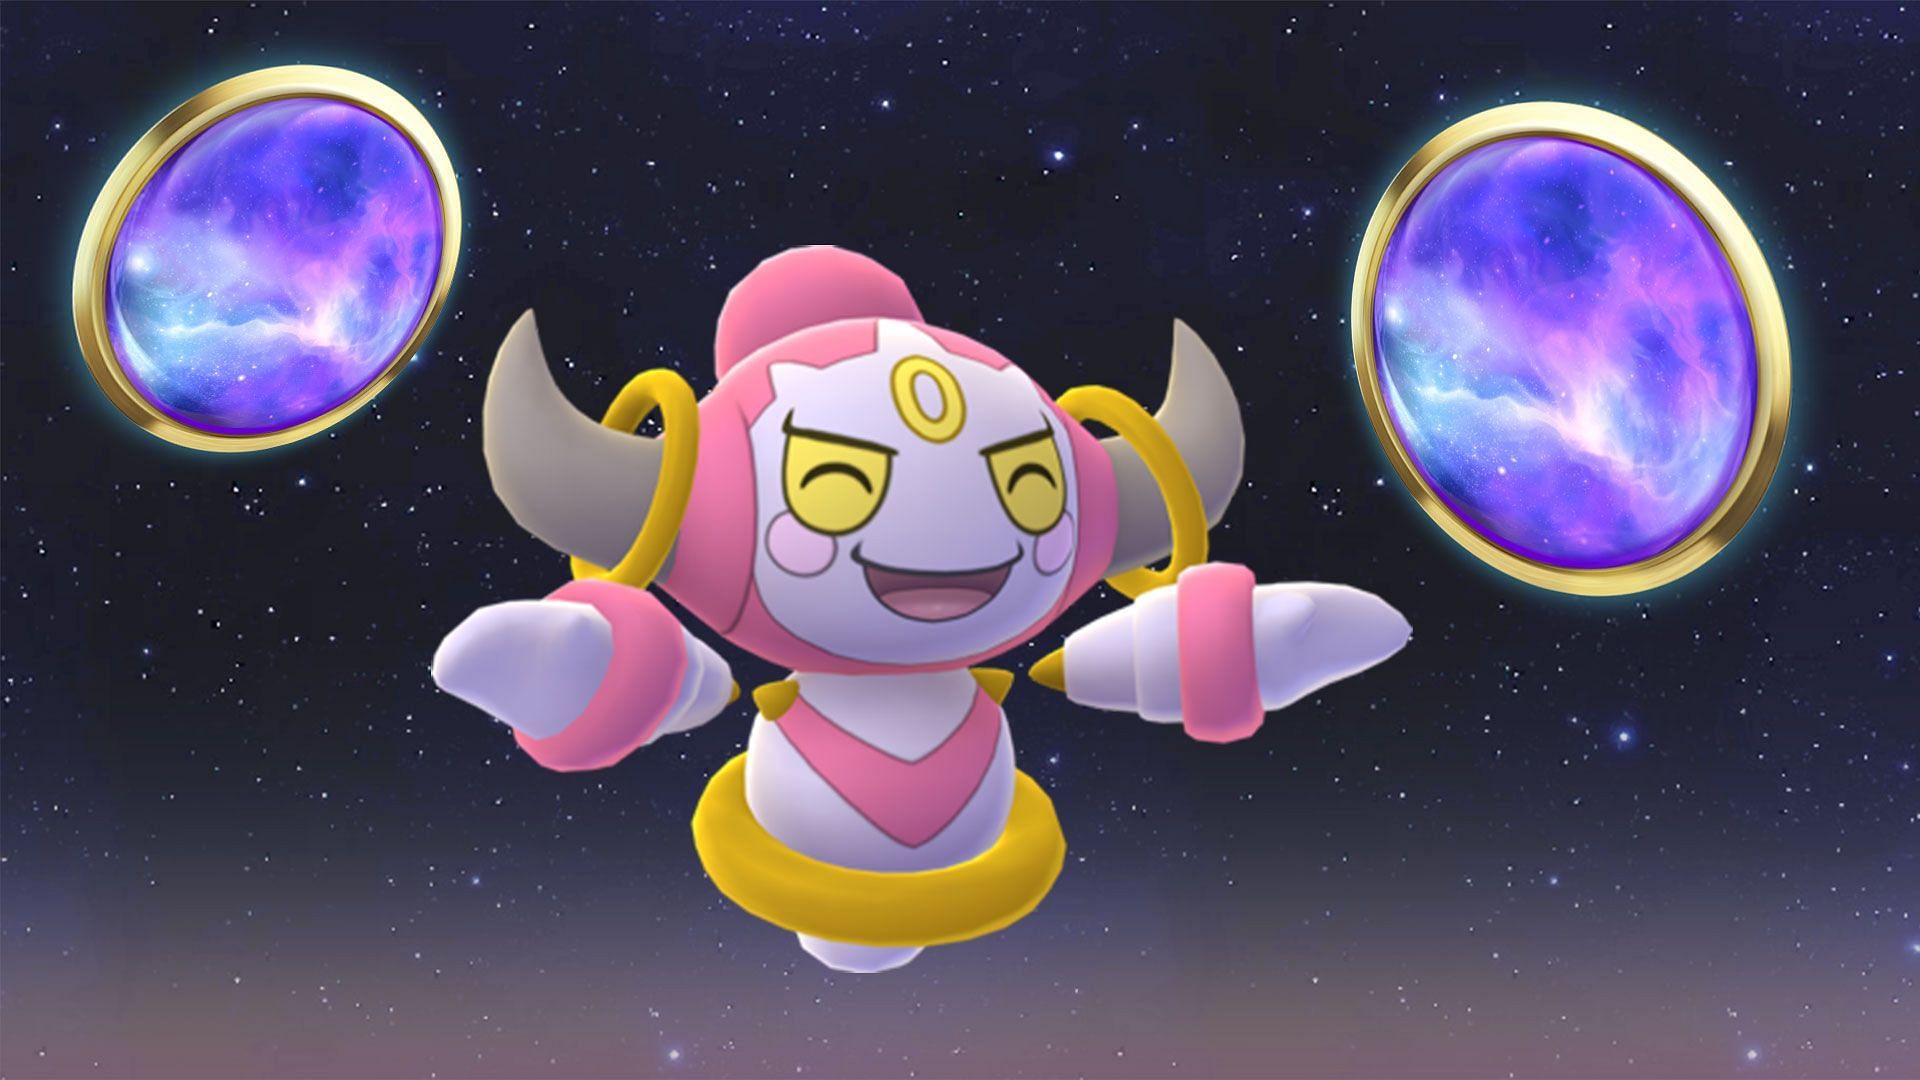 Hoopa is known for transporting Pokemon through portals (Image via Niantic)